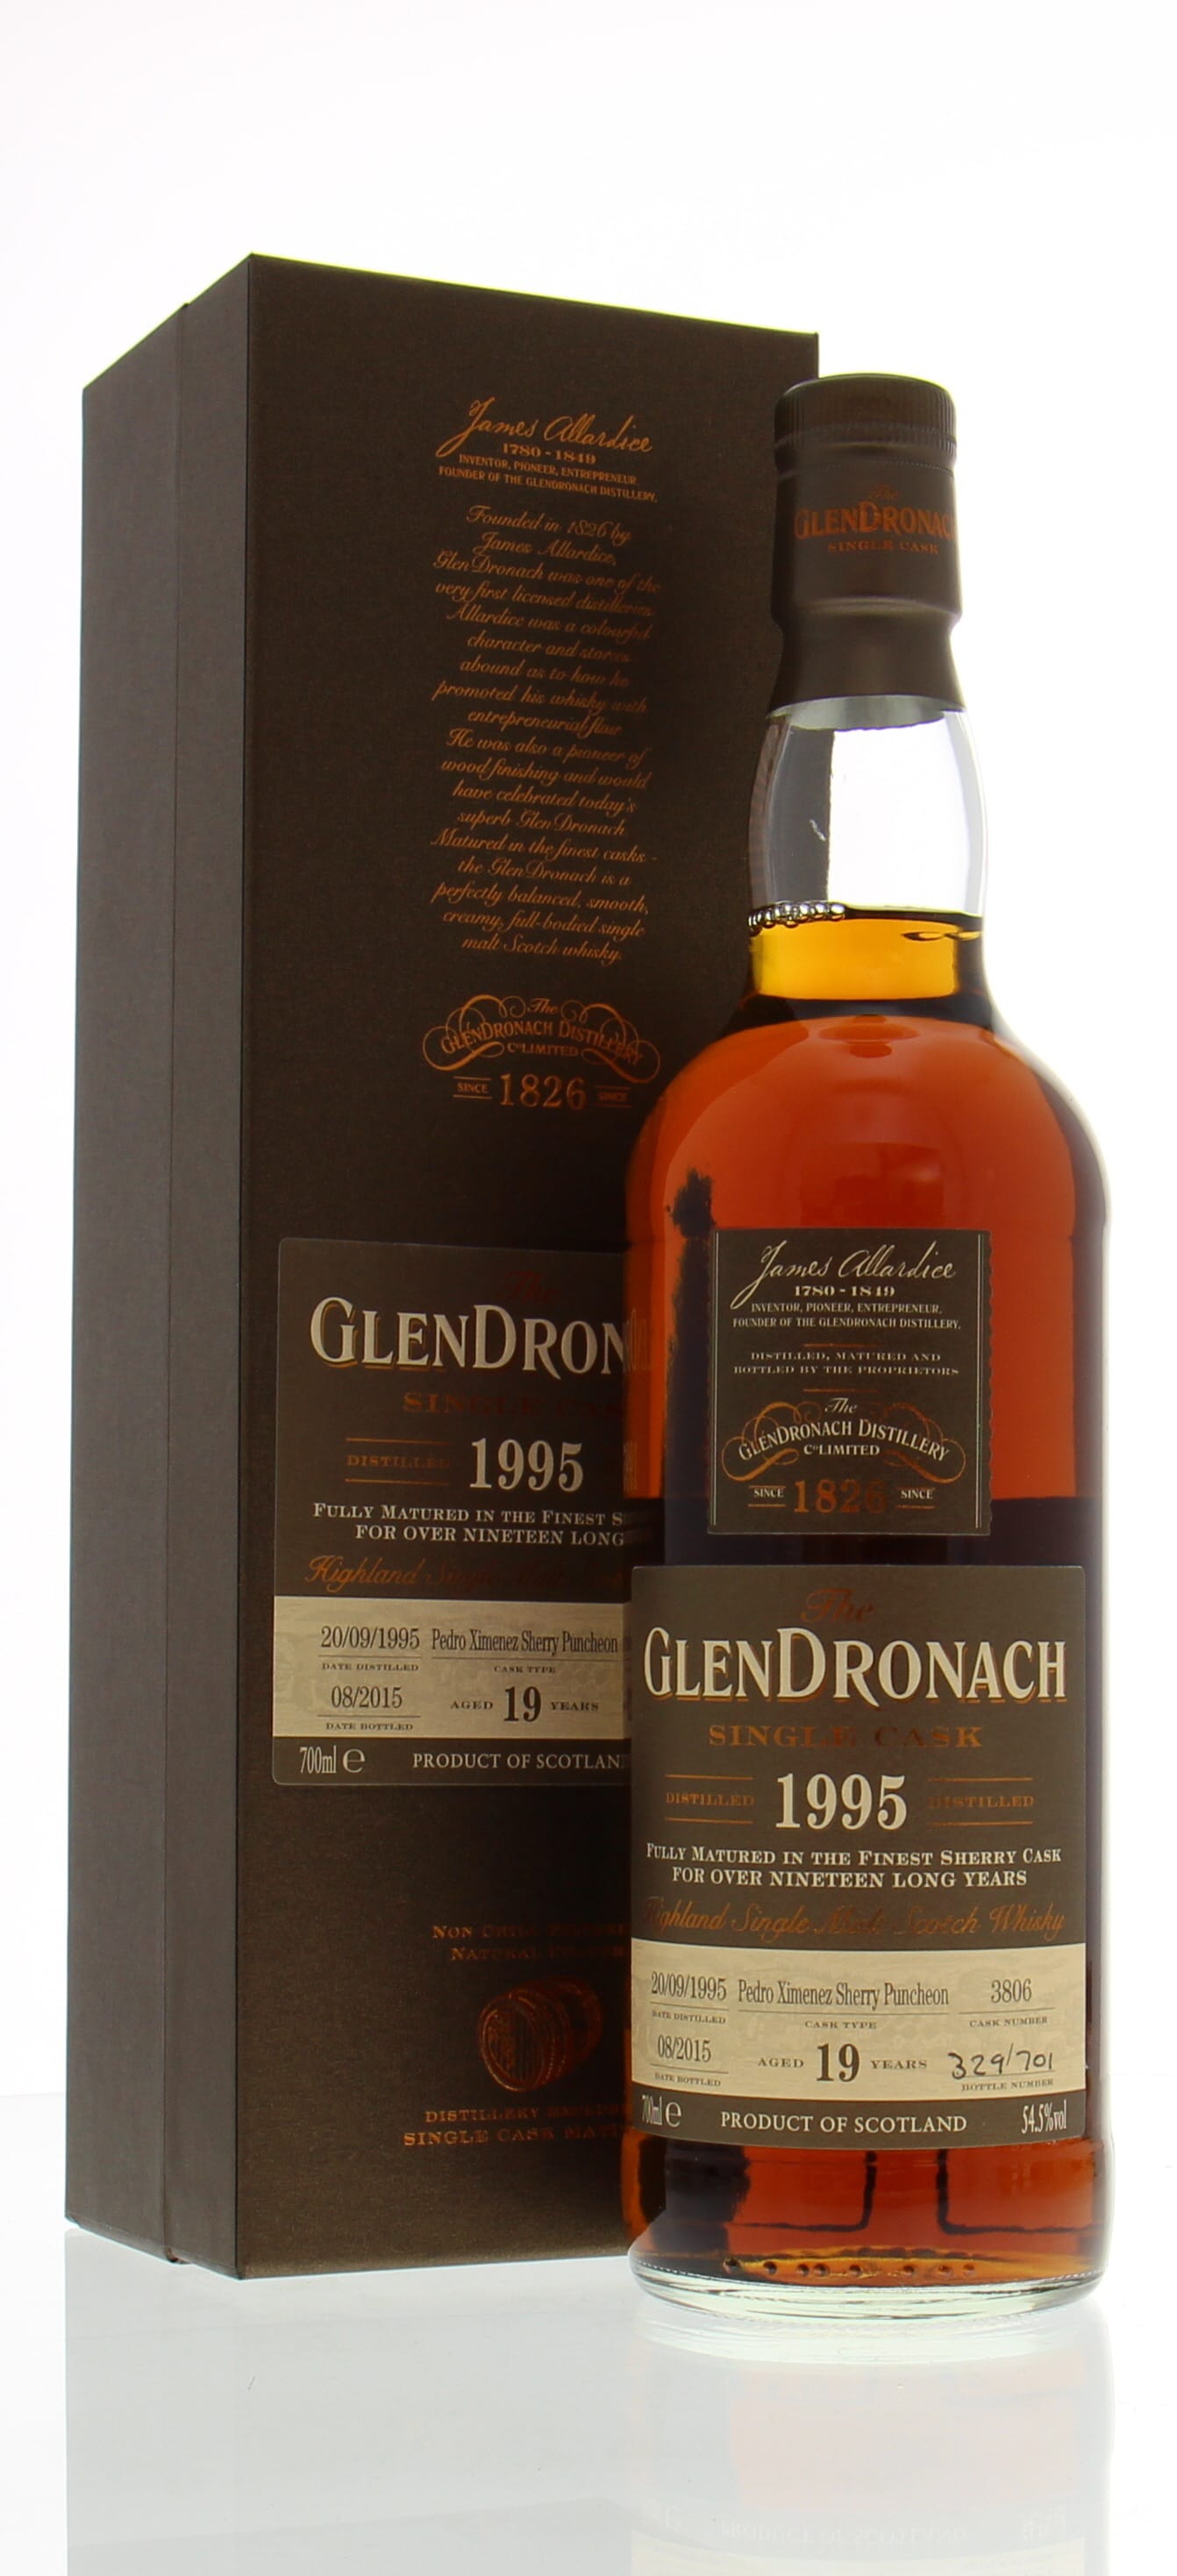 Glendronach - 19 Years Old Batch 12 Cask:3806 54.5% 1995 In Original Container